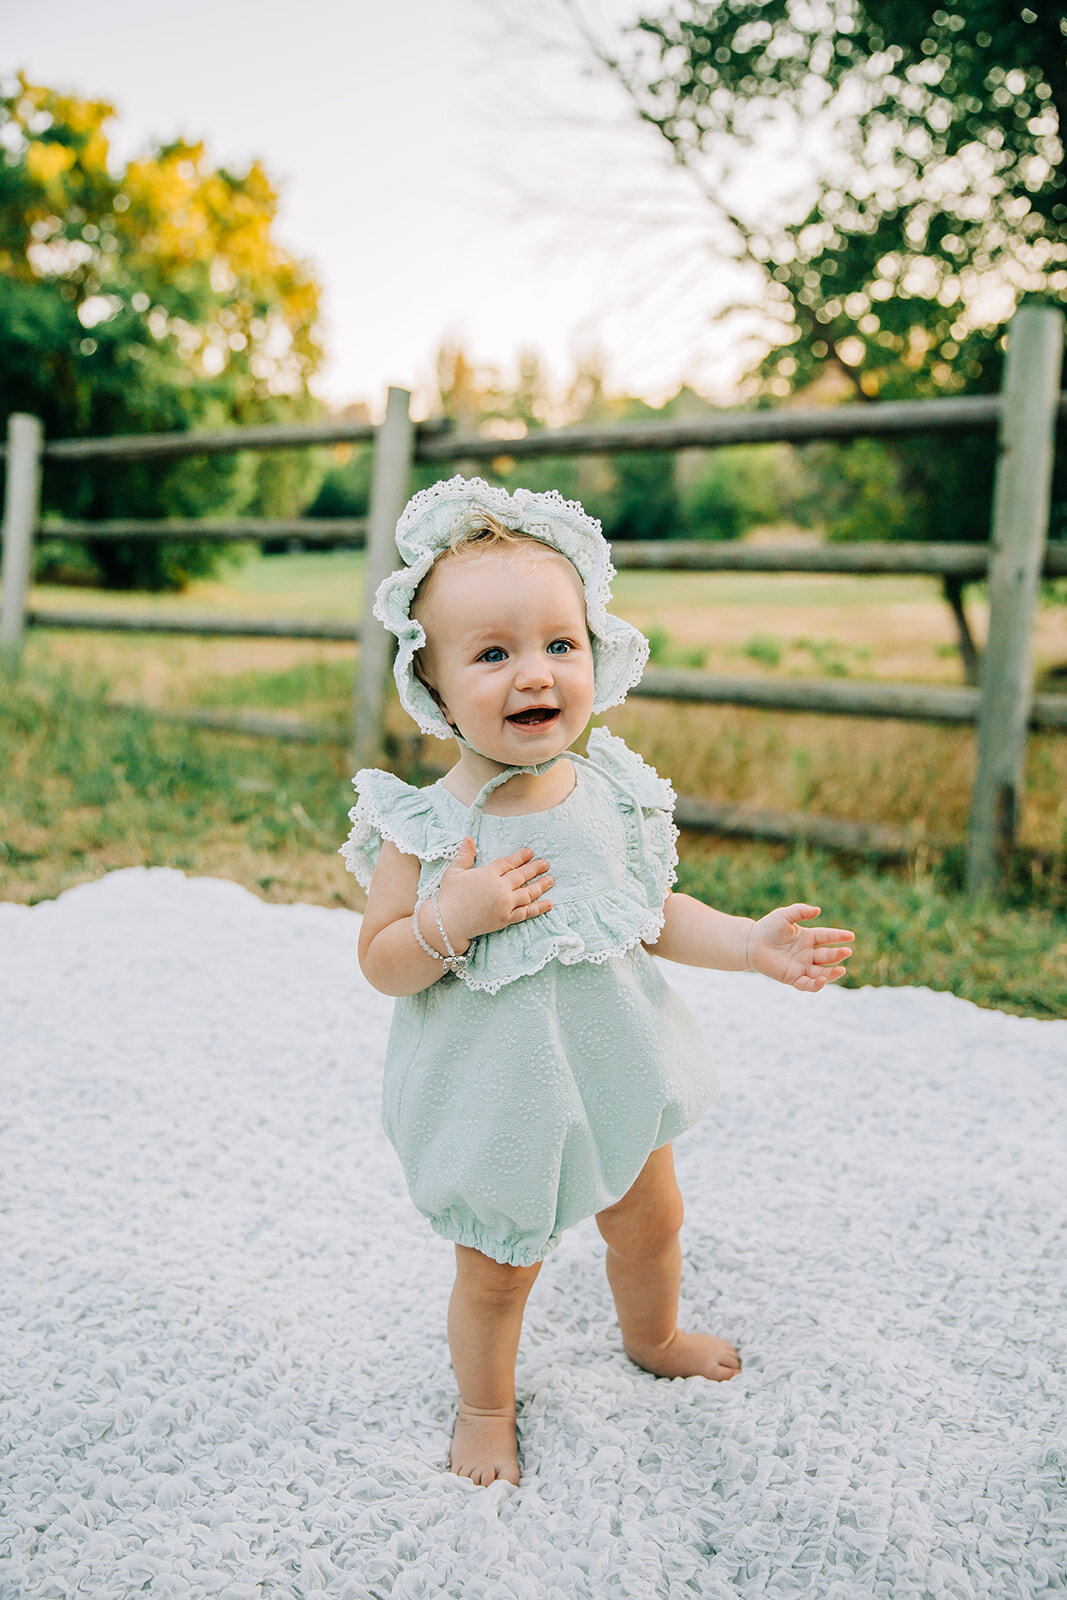  baby posing inspo standing baby poses outfit change cute bonnet mint baby out fit happy baby smiling girl adorable baby outfit birthday photoshoot girls day baby clothing inspo kids fashion inspo baby bracelet elegant baby style posing ideas for kid